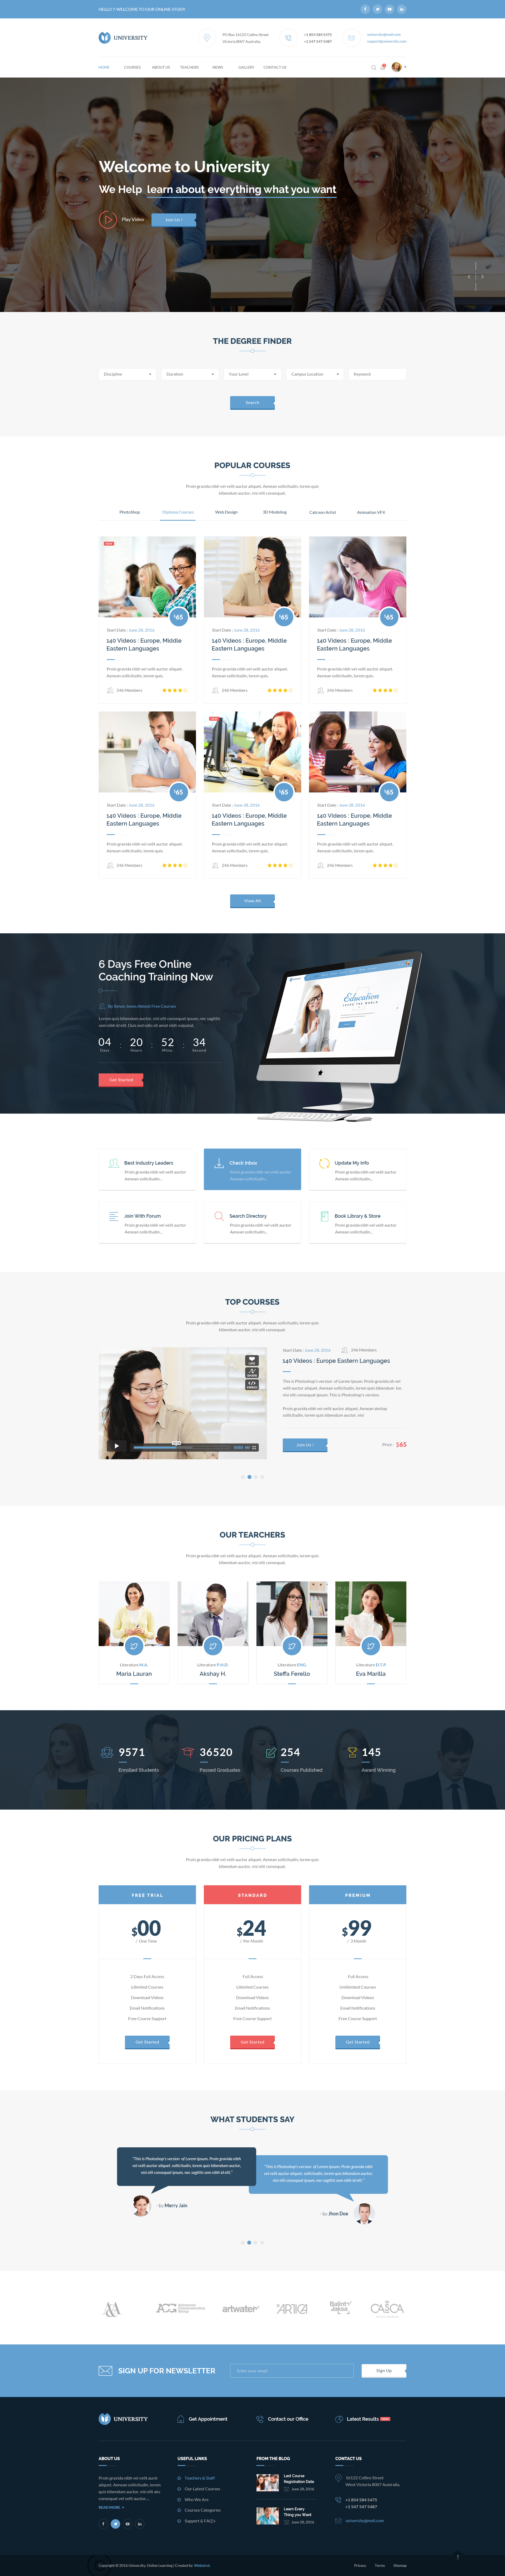 University - Education & Smart Learning Bootstrap PSD Template